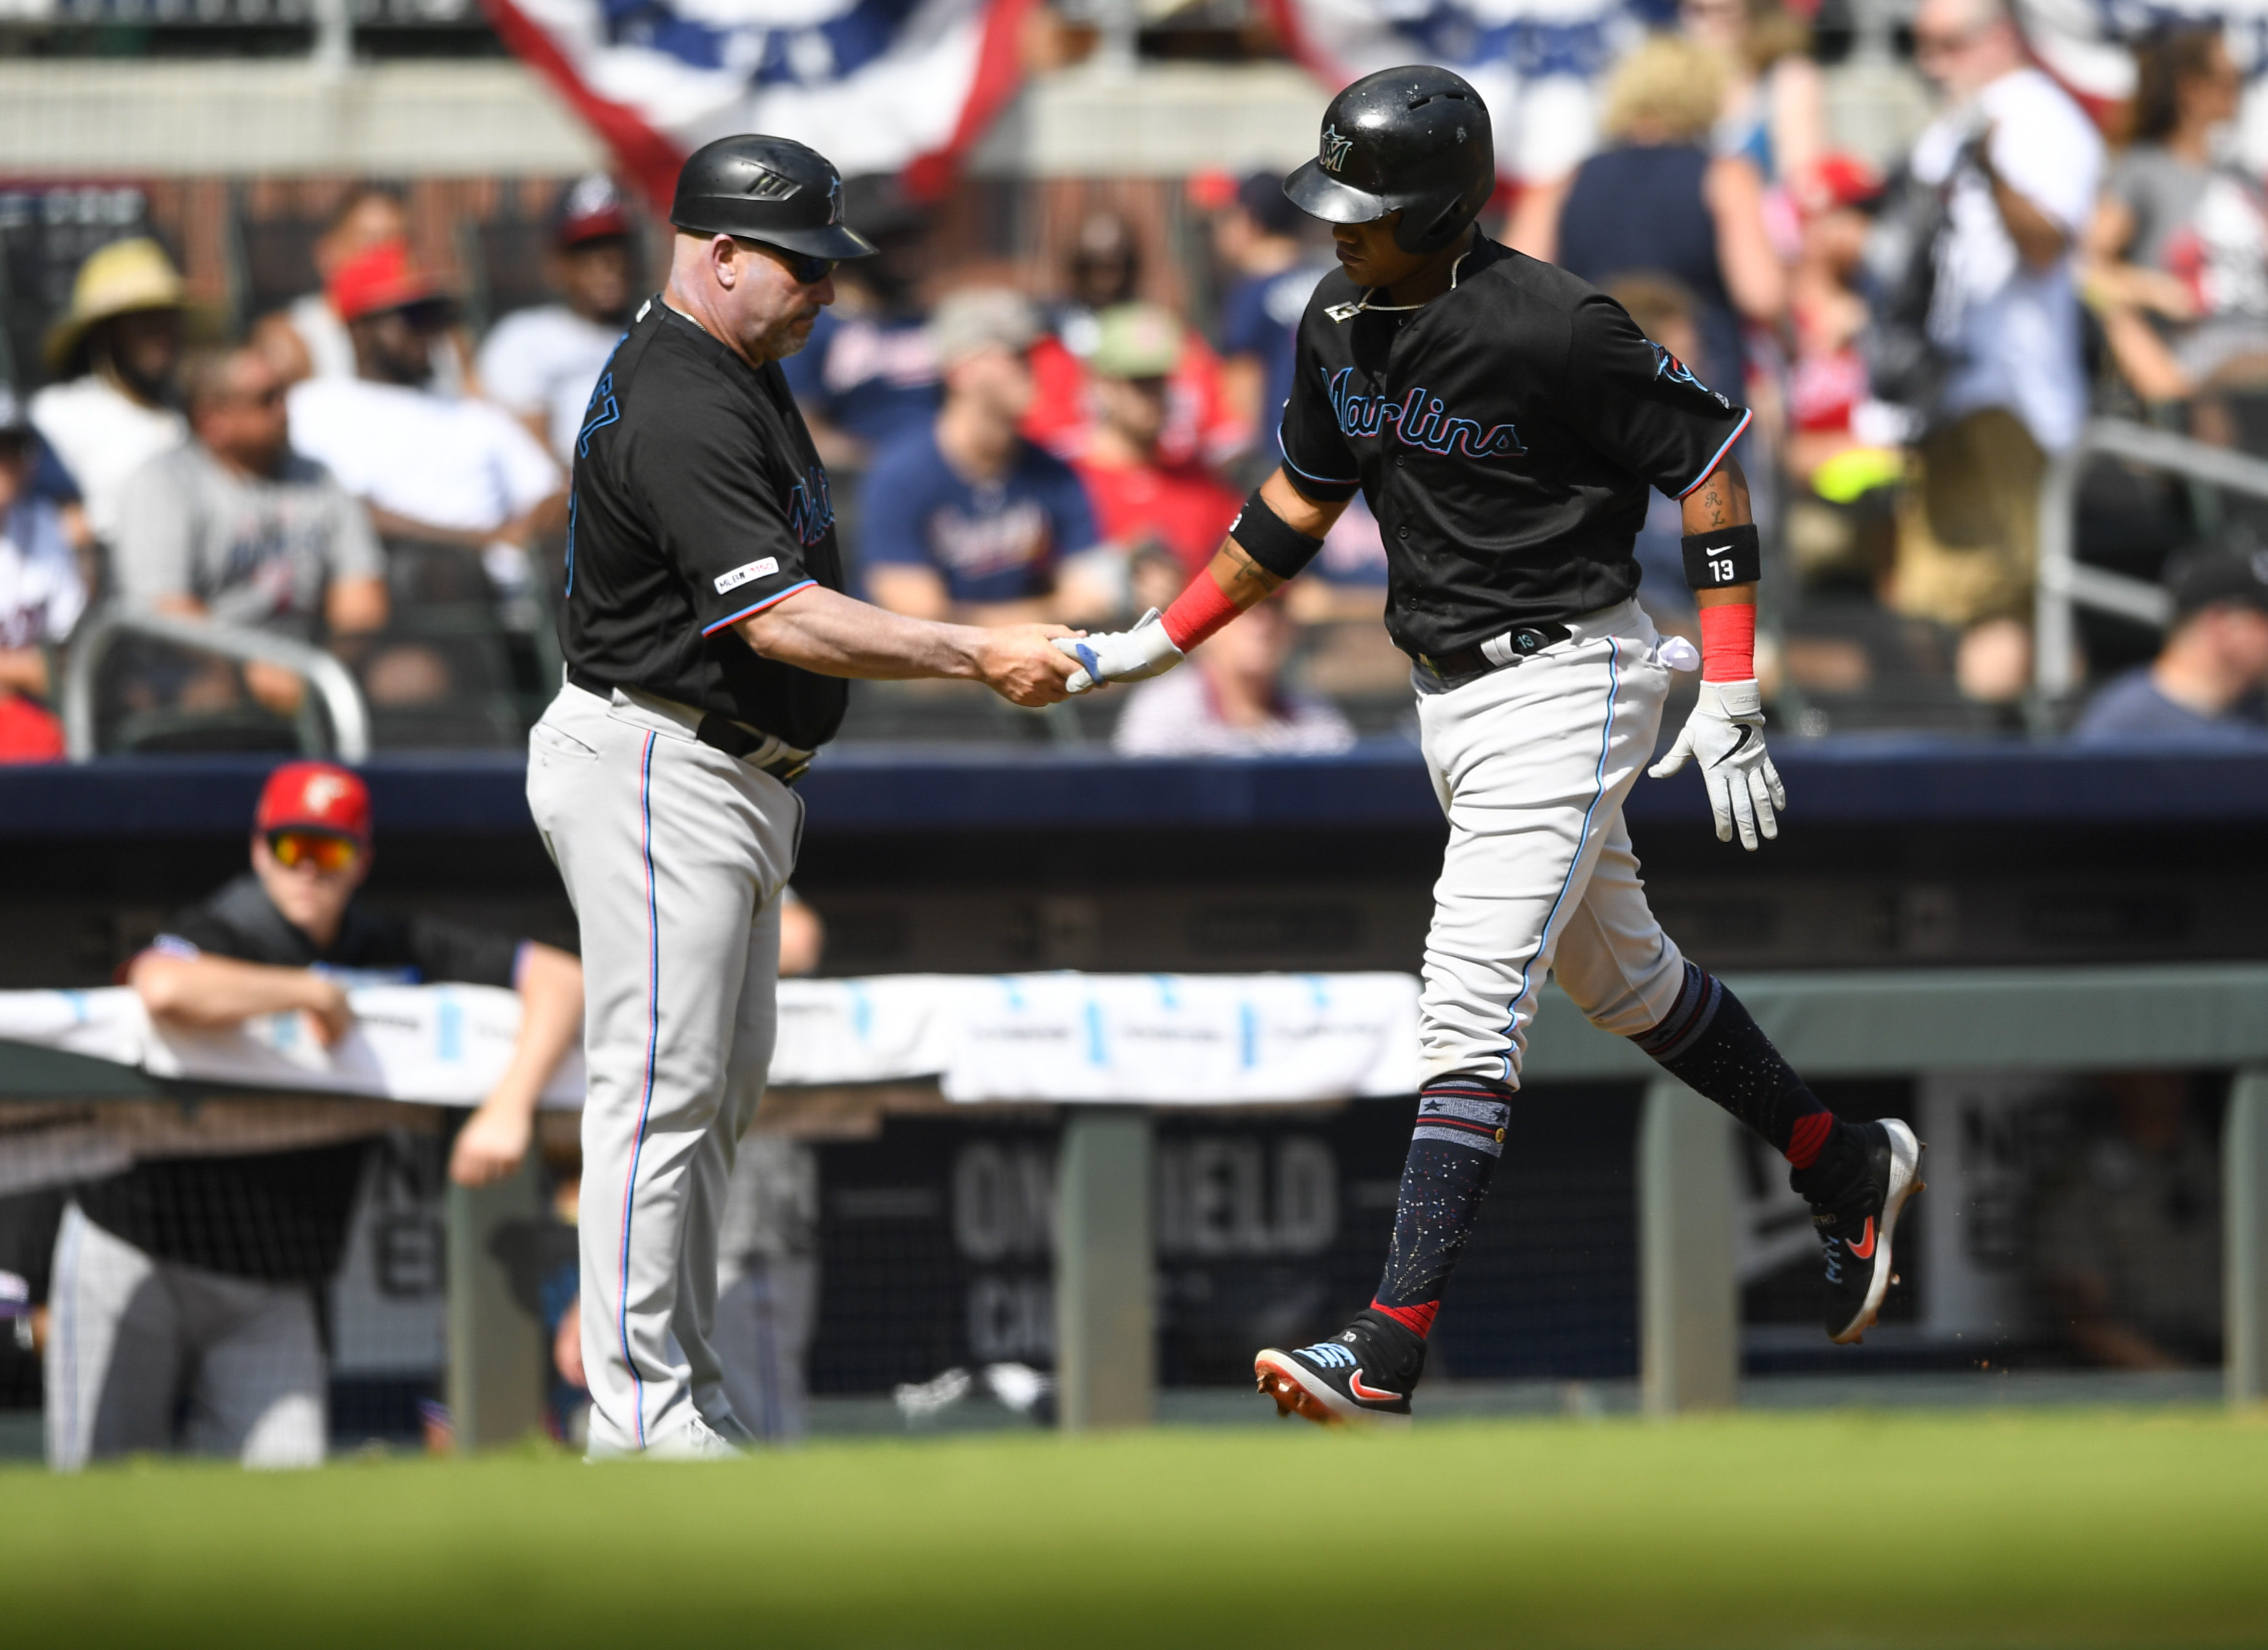 Rivera helps Marlins break out with 15 hits, beat Braves 5-4